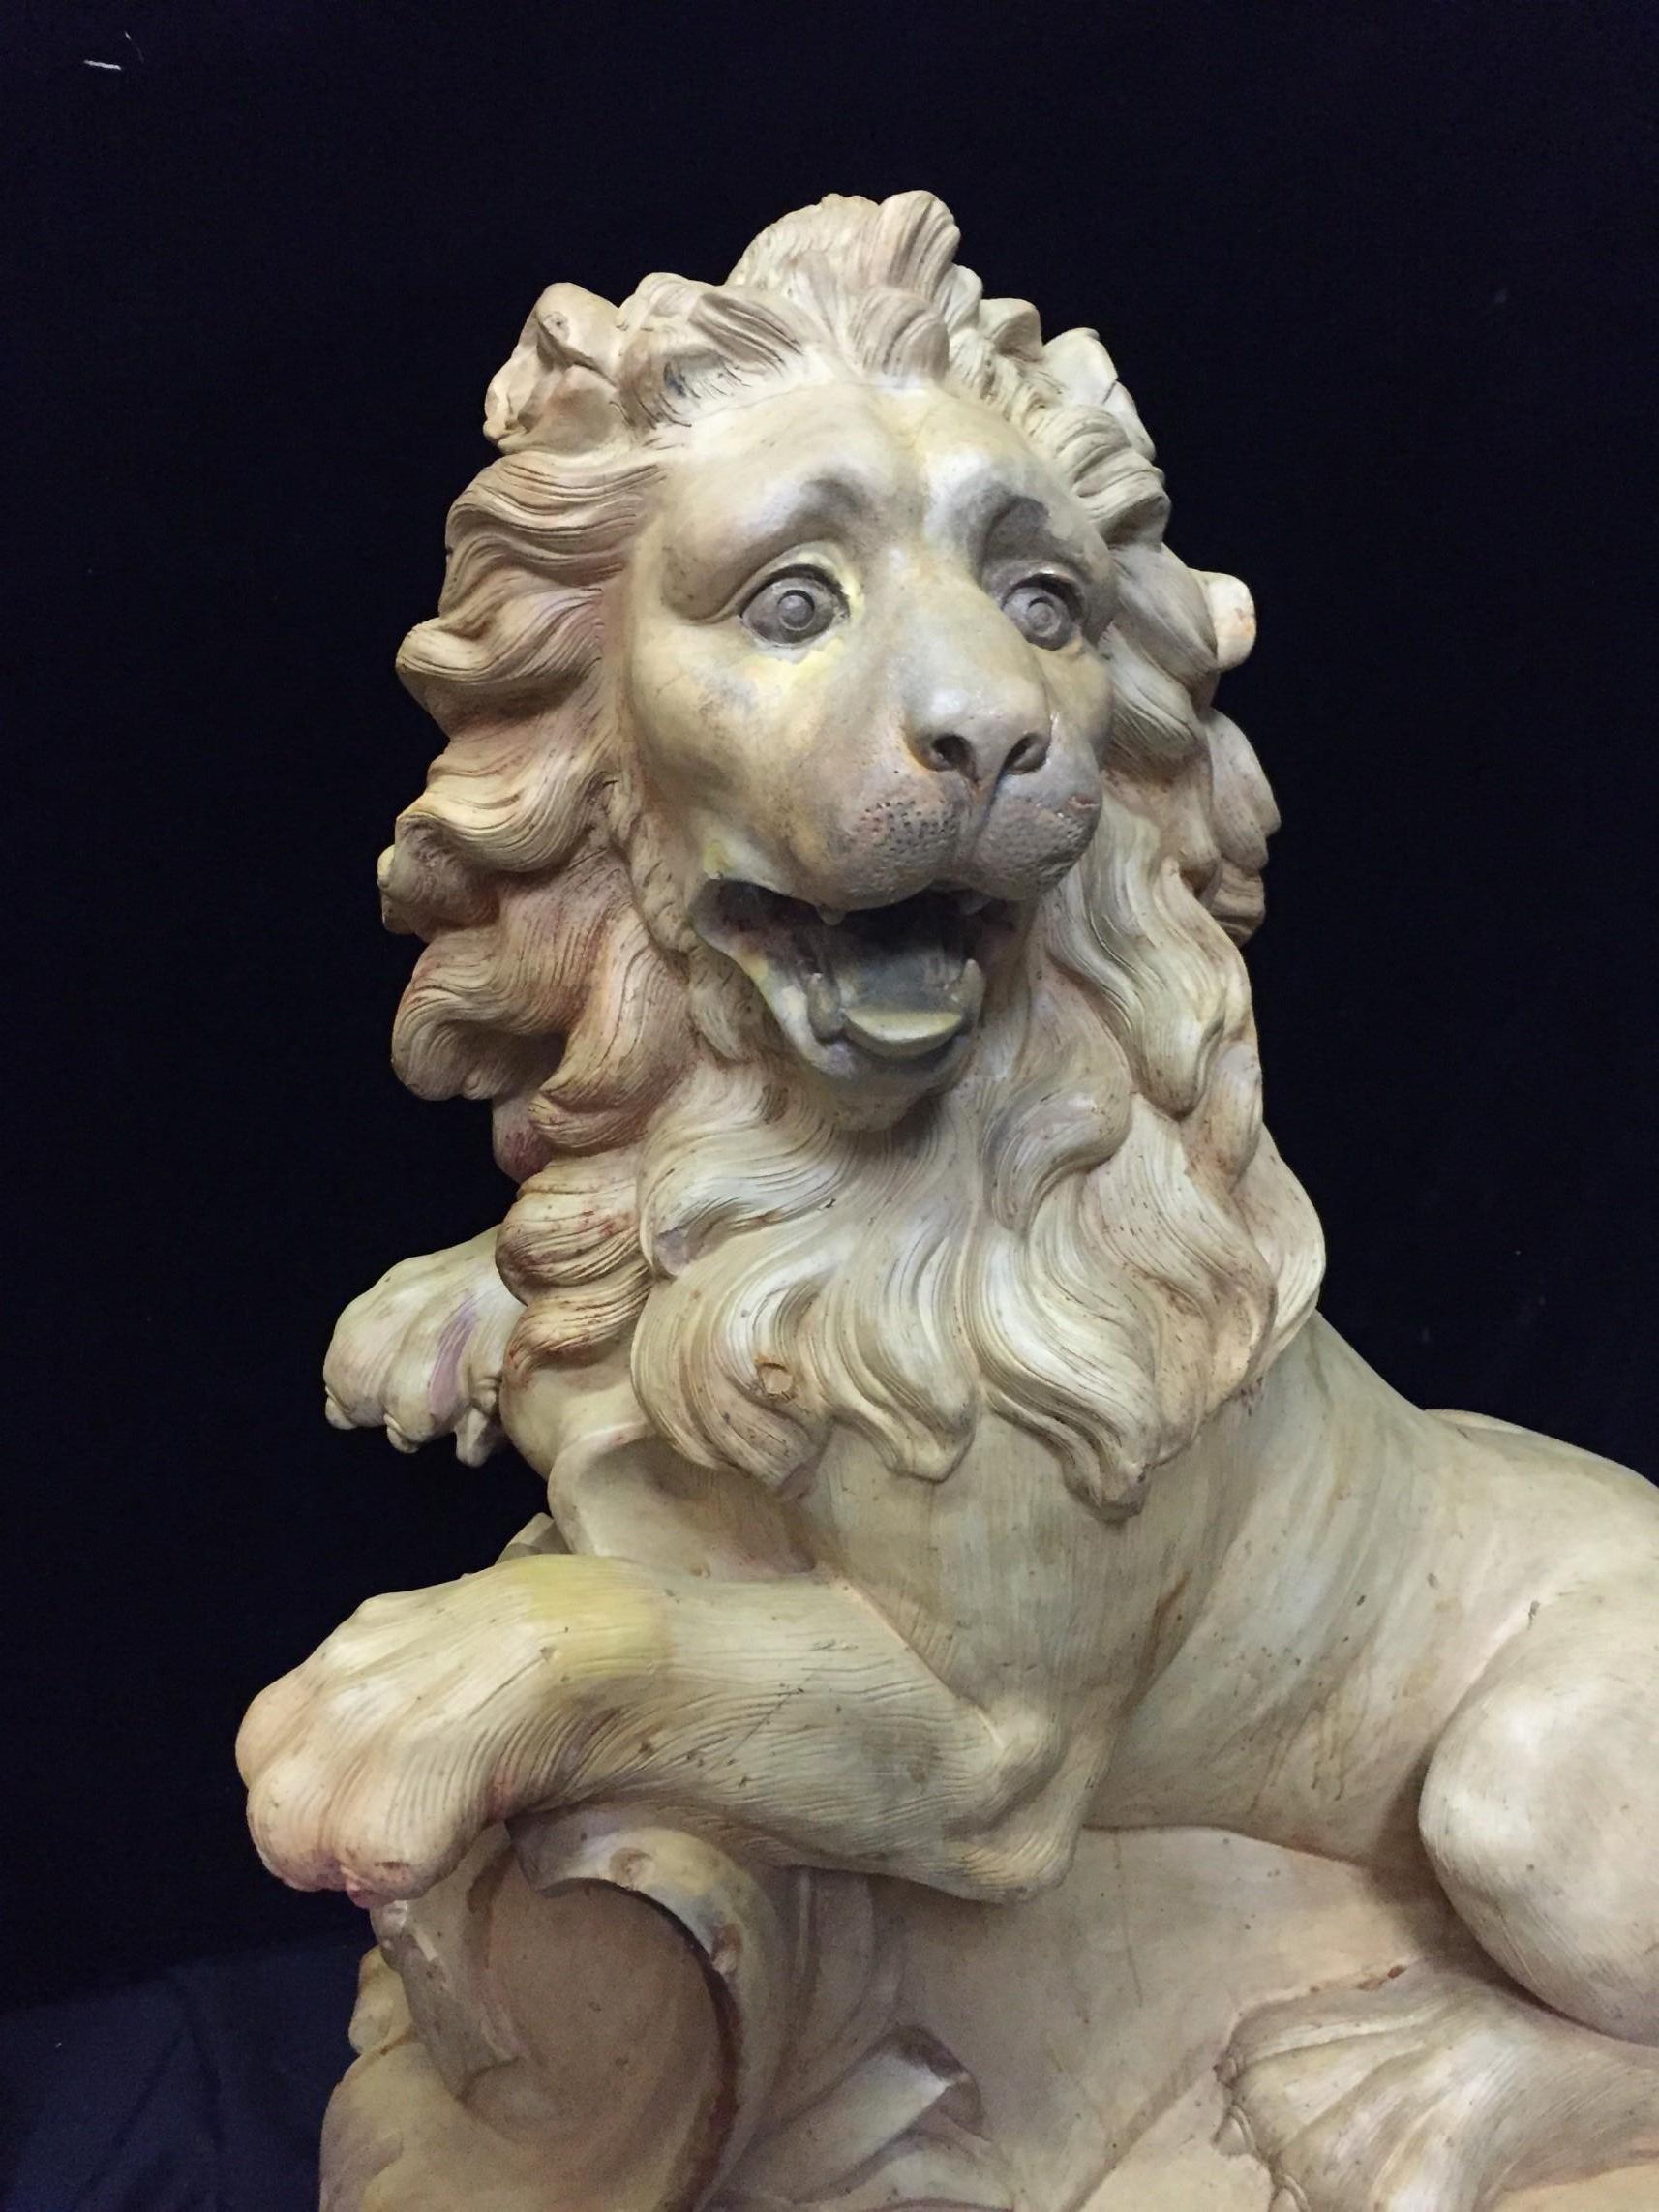 Spectacular opposing pair of late 19th-early 20th century French terracotta sculptures of life-size lions. Signed Mandeville: Bernier.
Both beautiful lions are roaring as they are inclined with their paws stretched on a floral crest. Both with